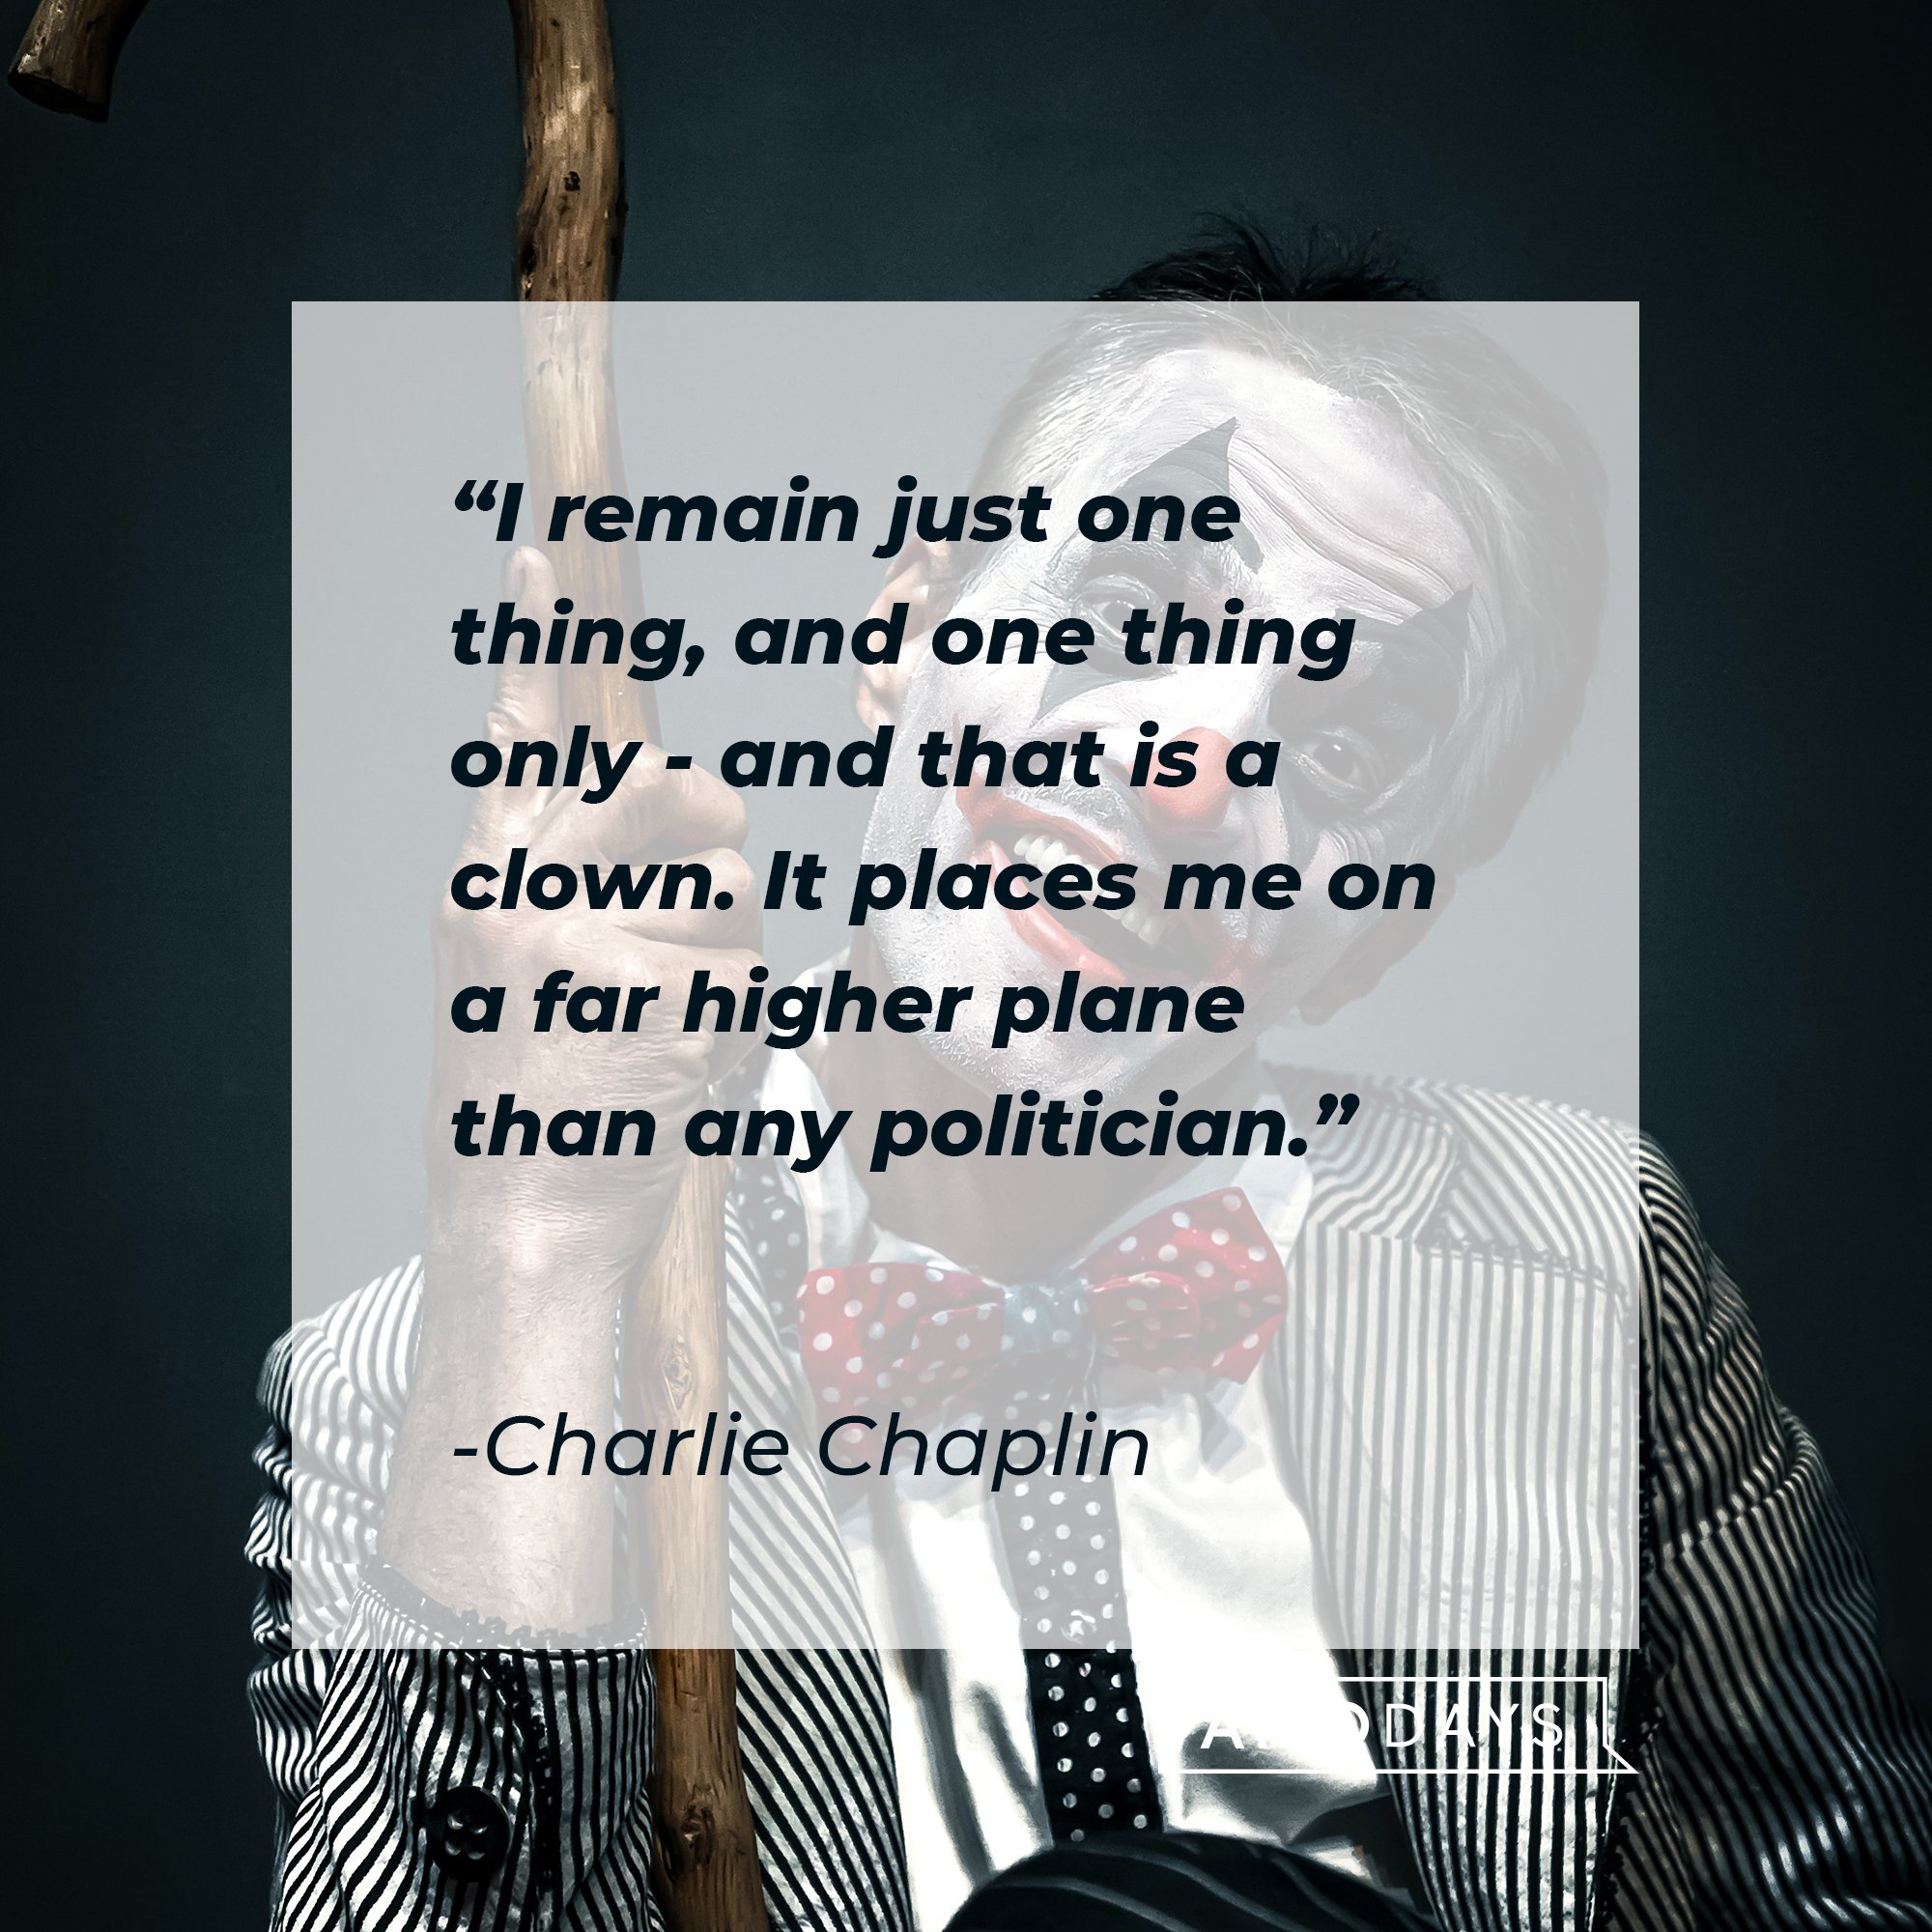 Charlie Chaplin"S quote "I remain just one thing, and one thing only - and that is a clown. It places me on a far higher plane than any politician." | Source: Unsplash.com